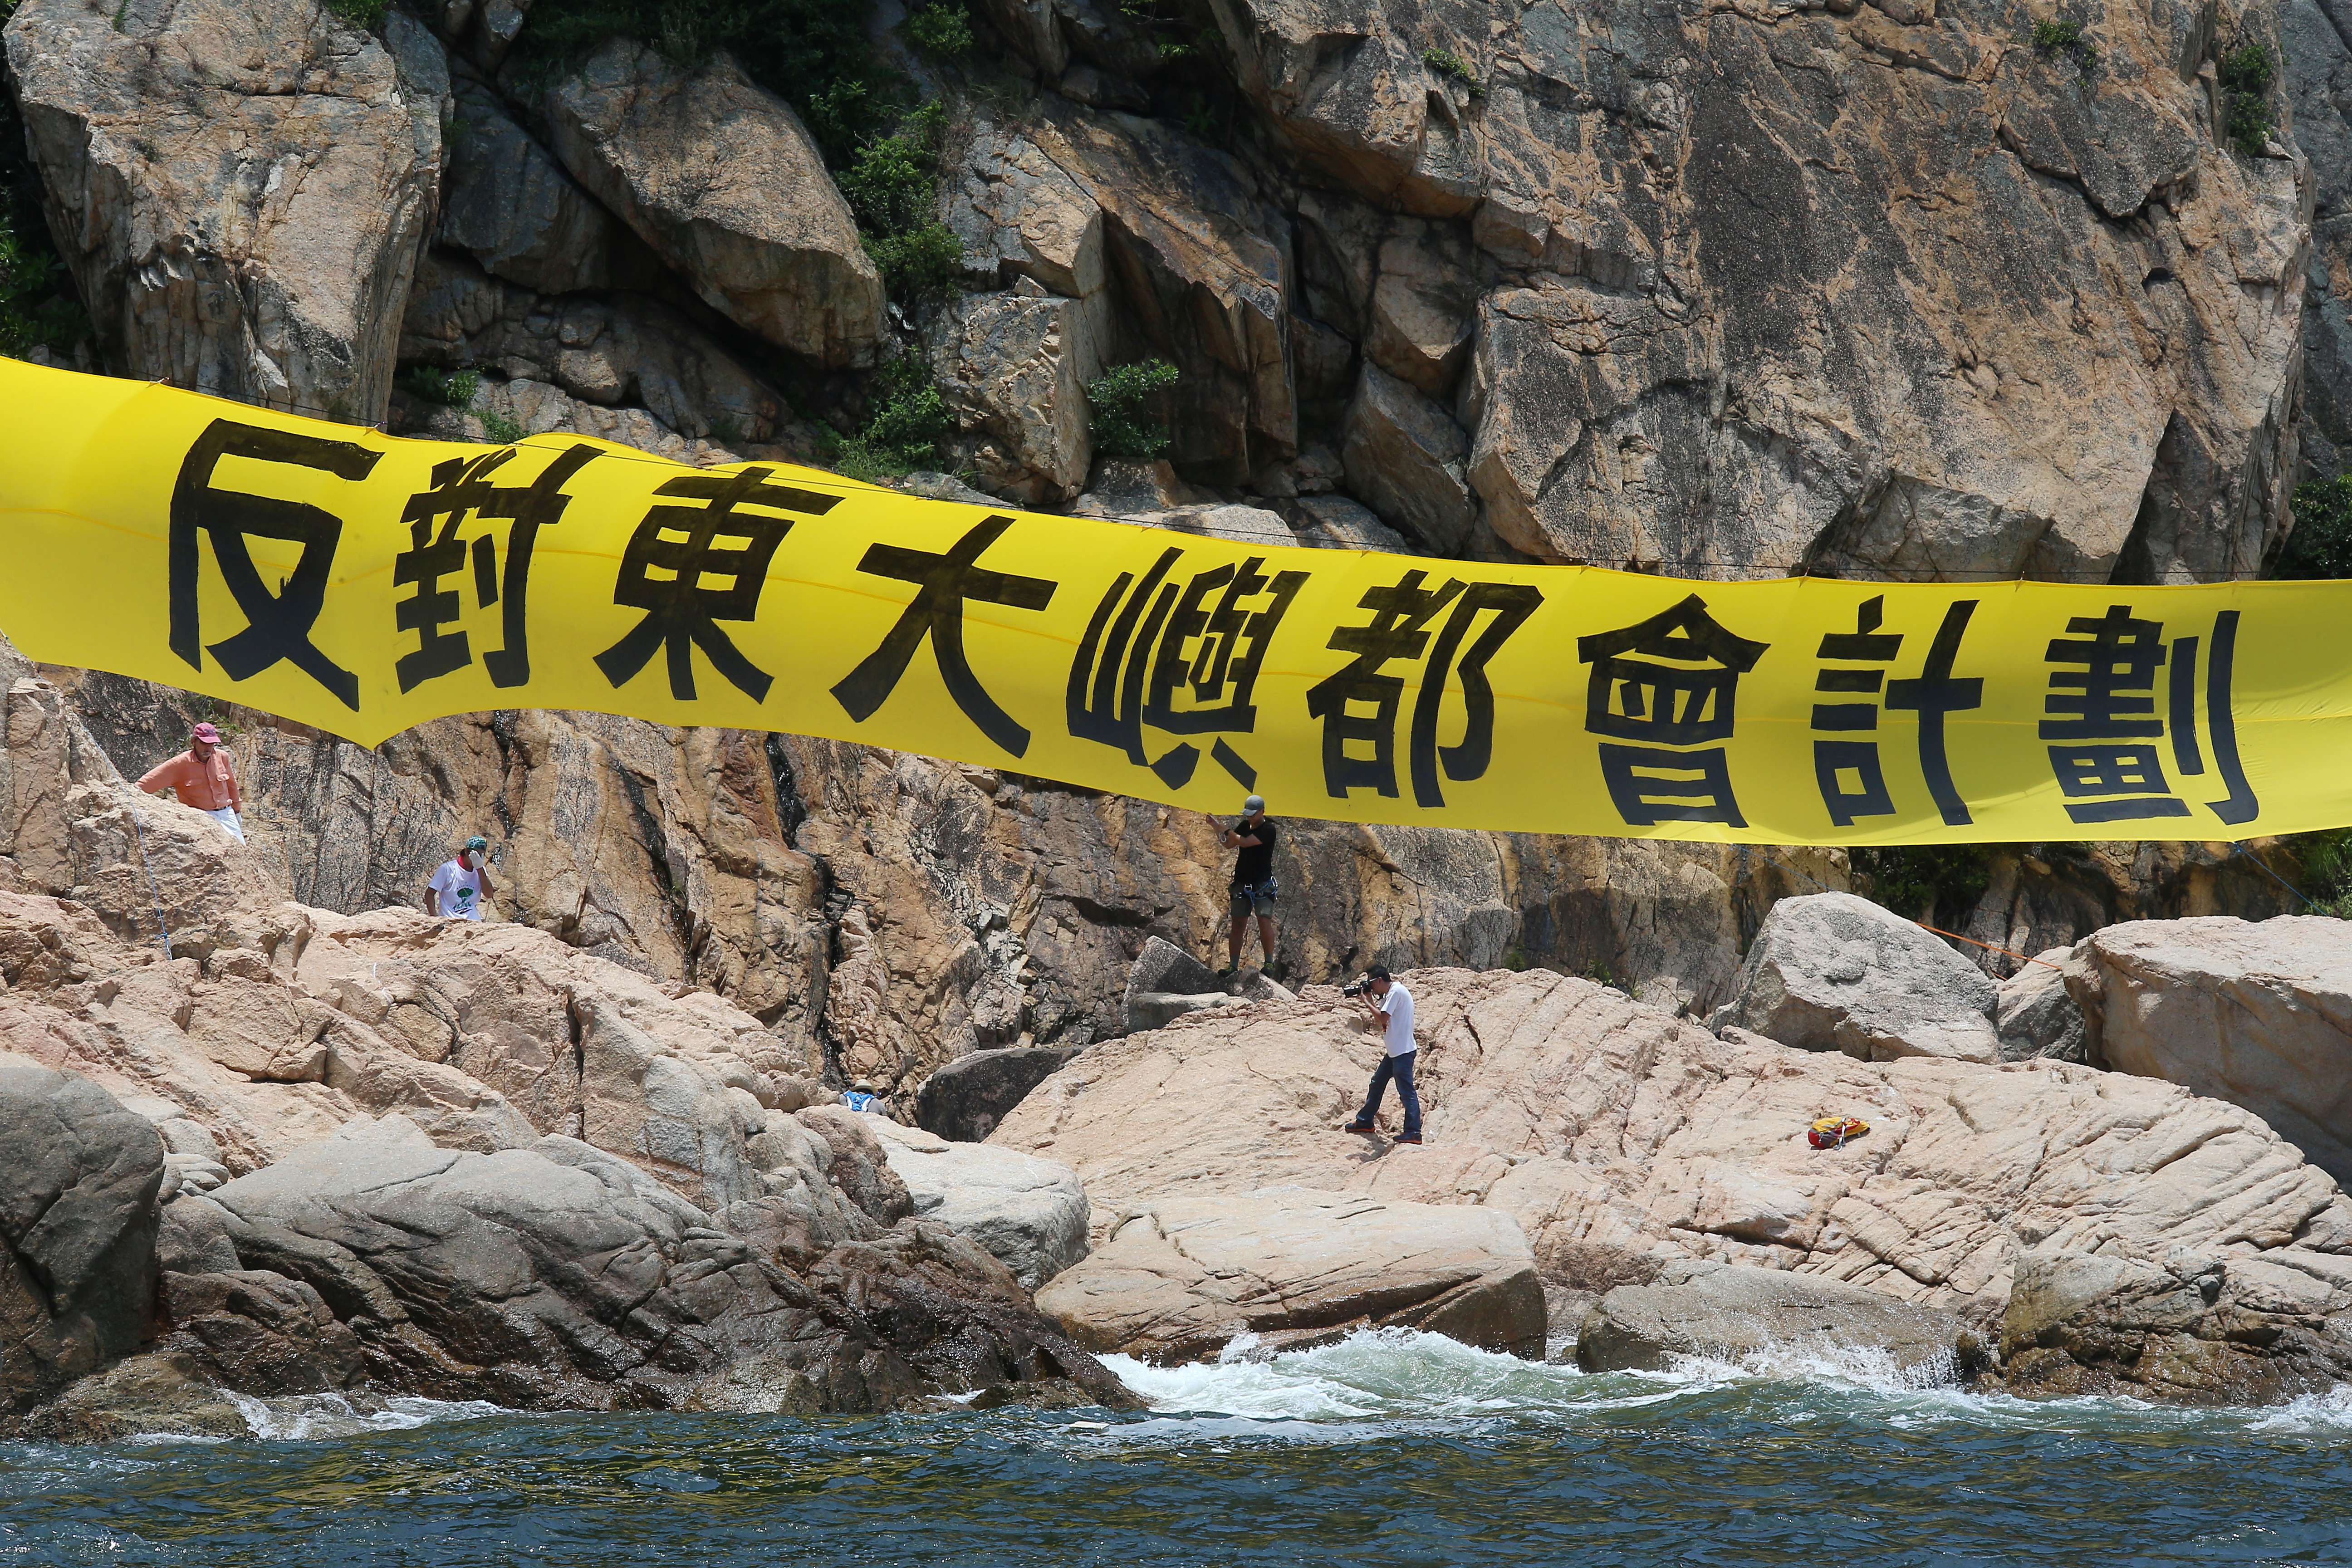 Activists against the creation of an East Lantau Metropolis put up a banner in Kau Yi Chau during a protest in June. Photo: K. Y. Cheng